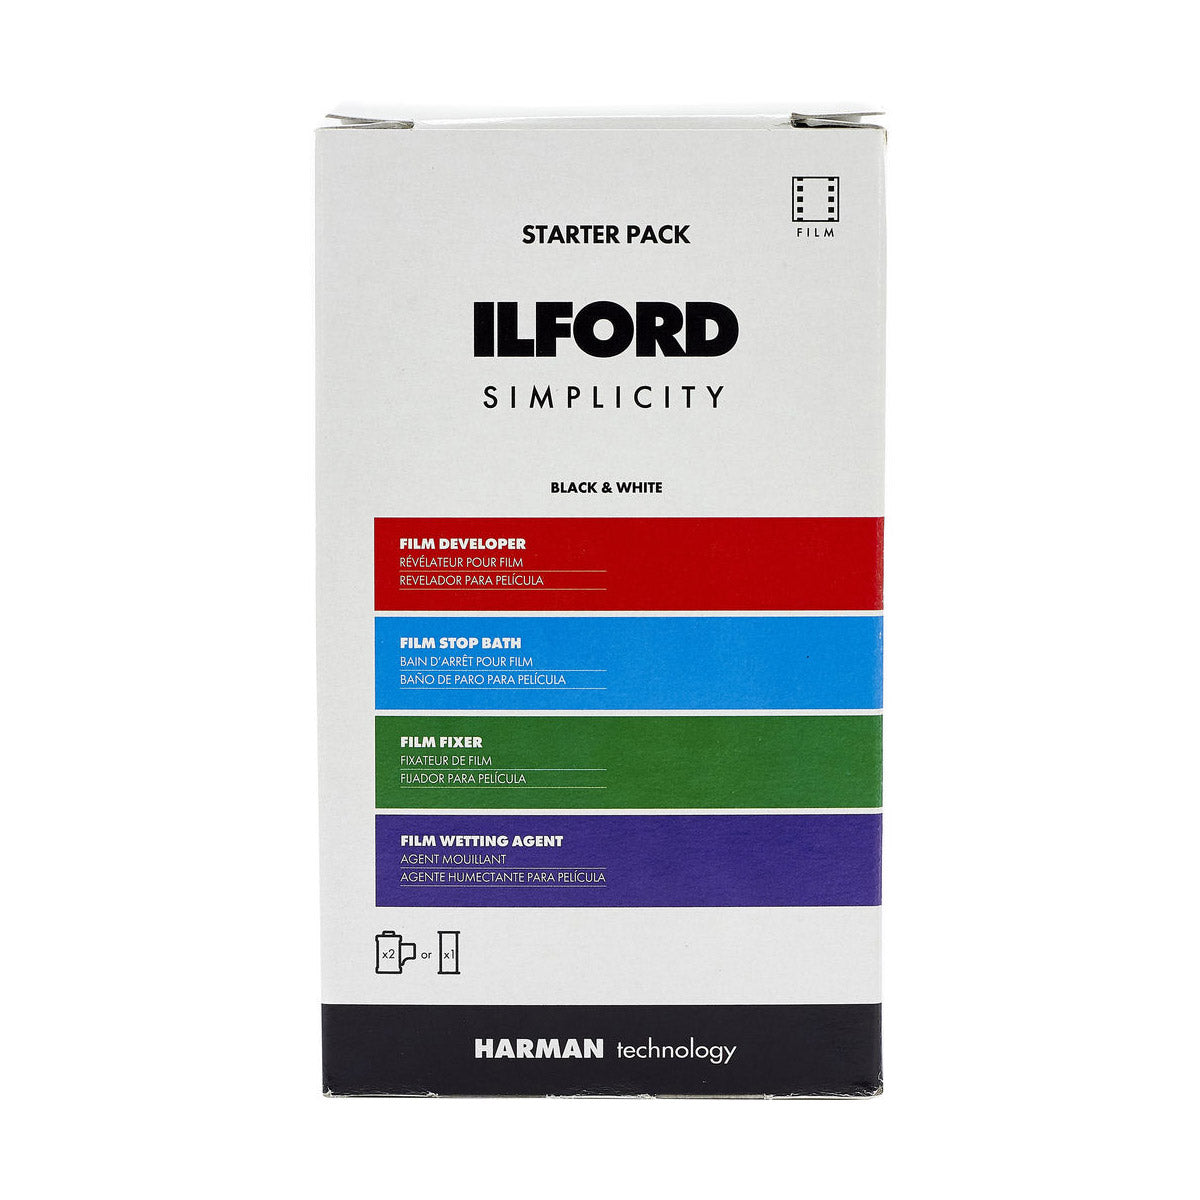 image_note ILFORD SIMPLICITY Chemical Starter Pack